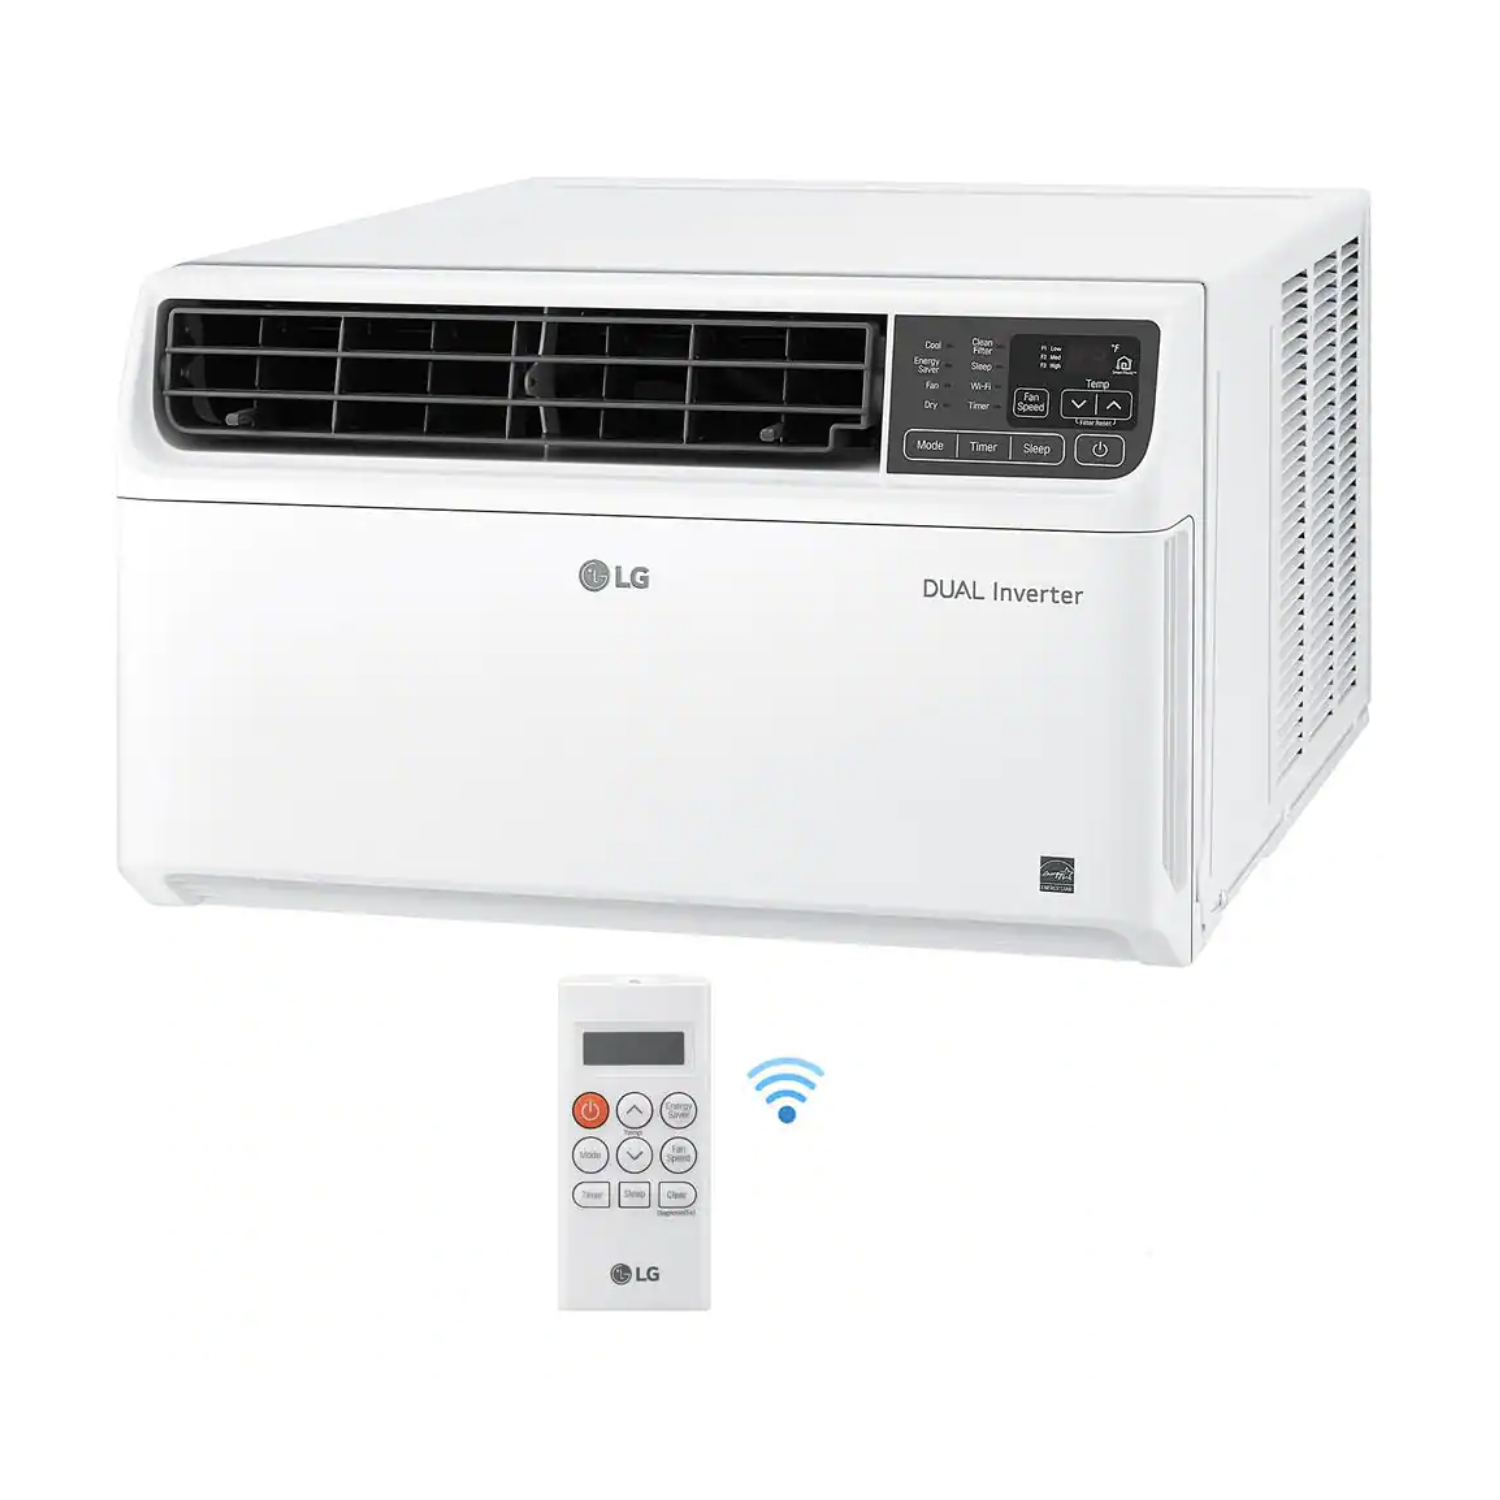 LG 8,000 BTU Dual Inverter Smart (Wi-Fi) Window Air Conditioner, Cools 350 Sq.Ft, Ultra Quiet, 35% Energy Savings, Works with LG ThinQ, Alexa, Google & Remote - 115 V (LW8022IVISM)